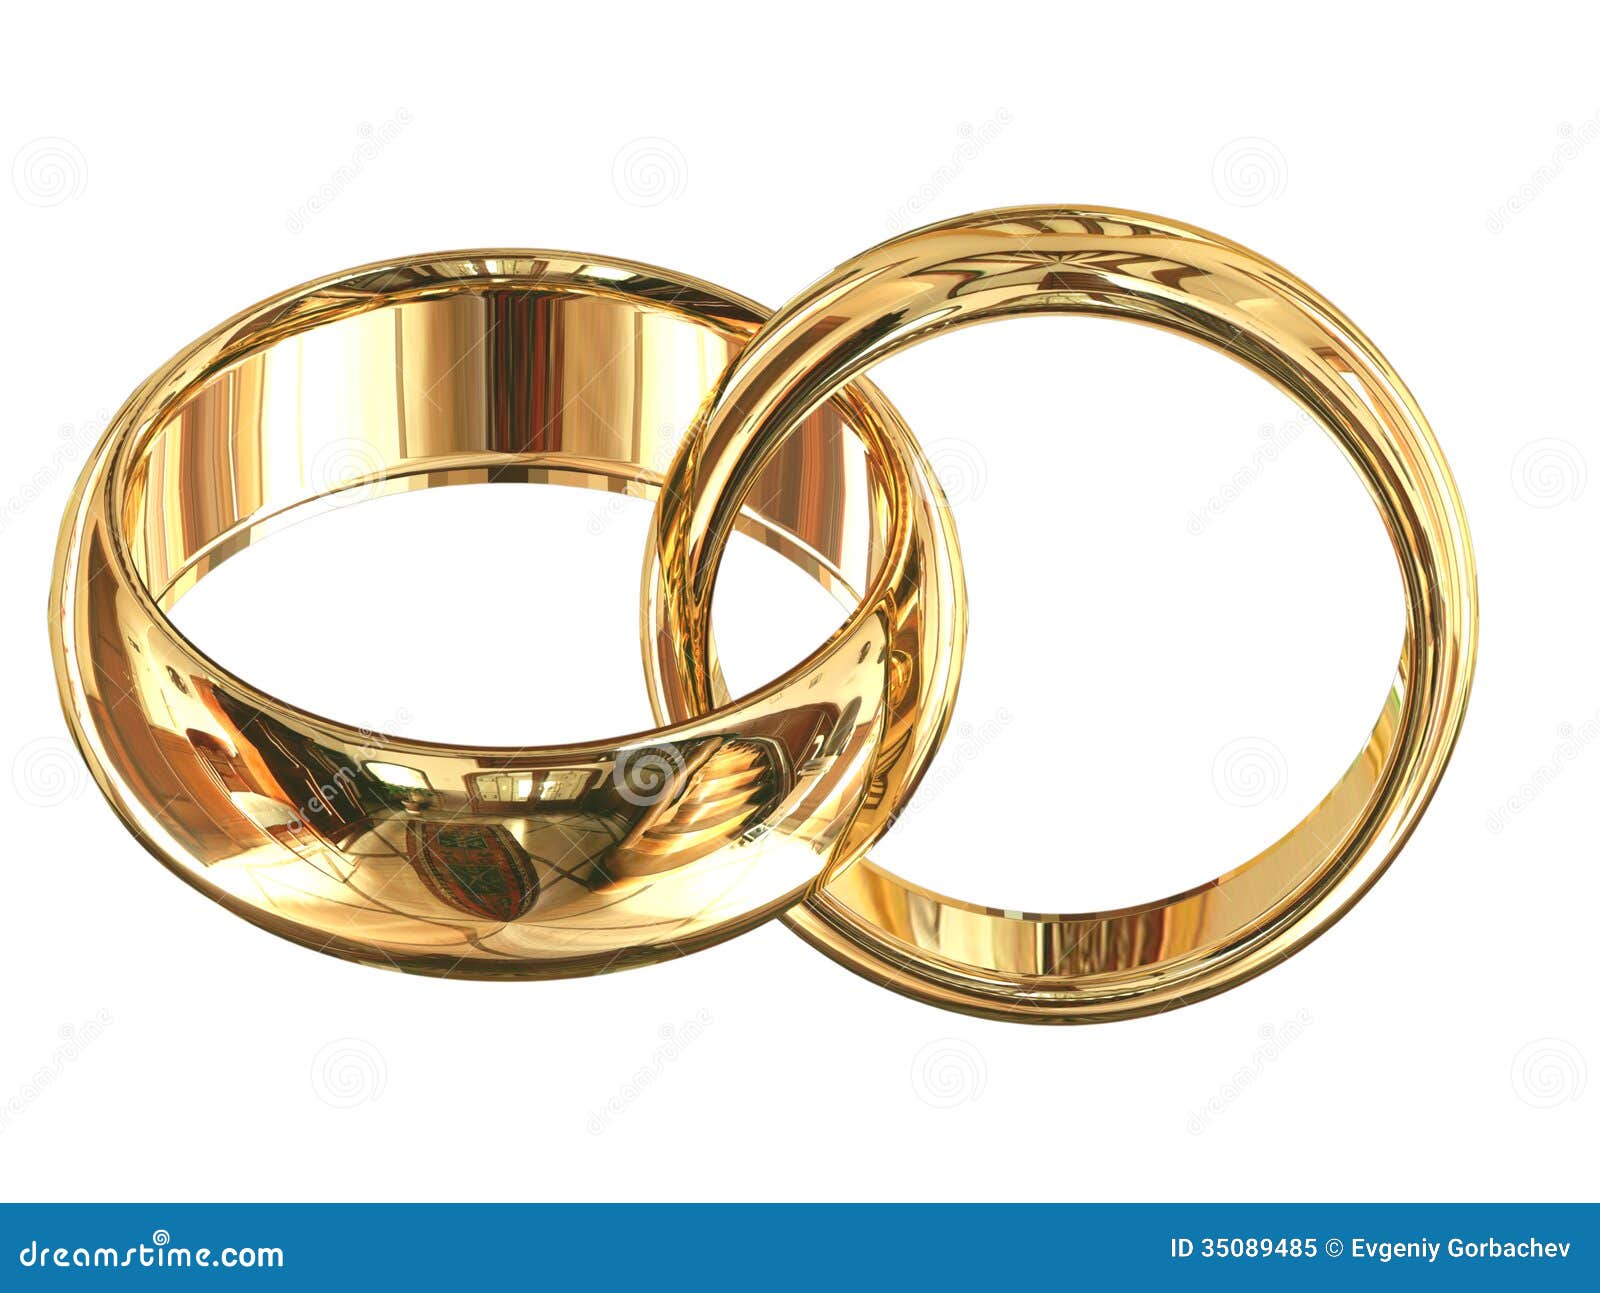 wedding rings togther